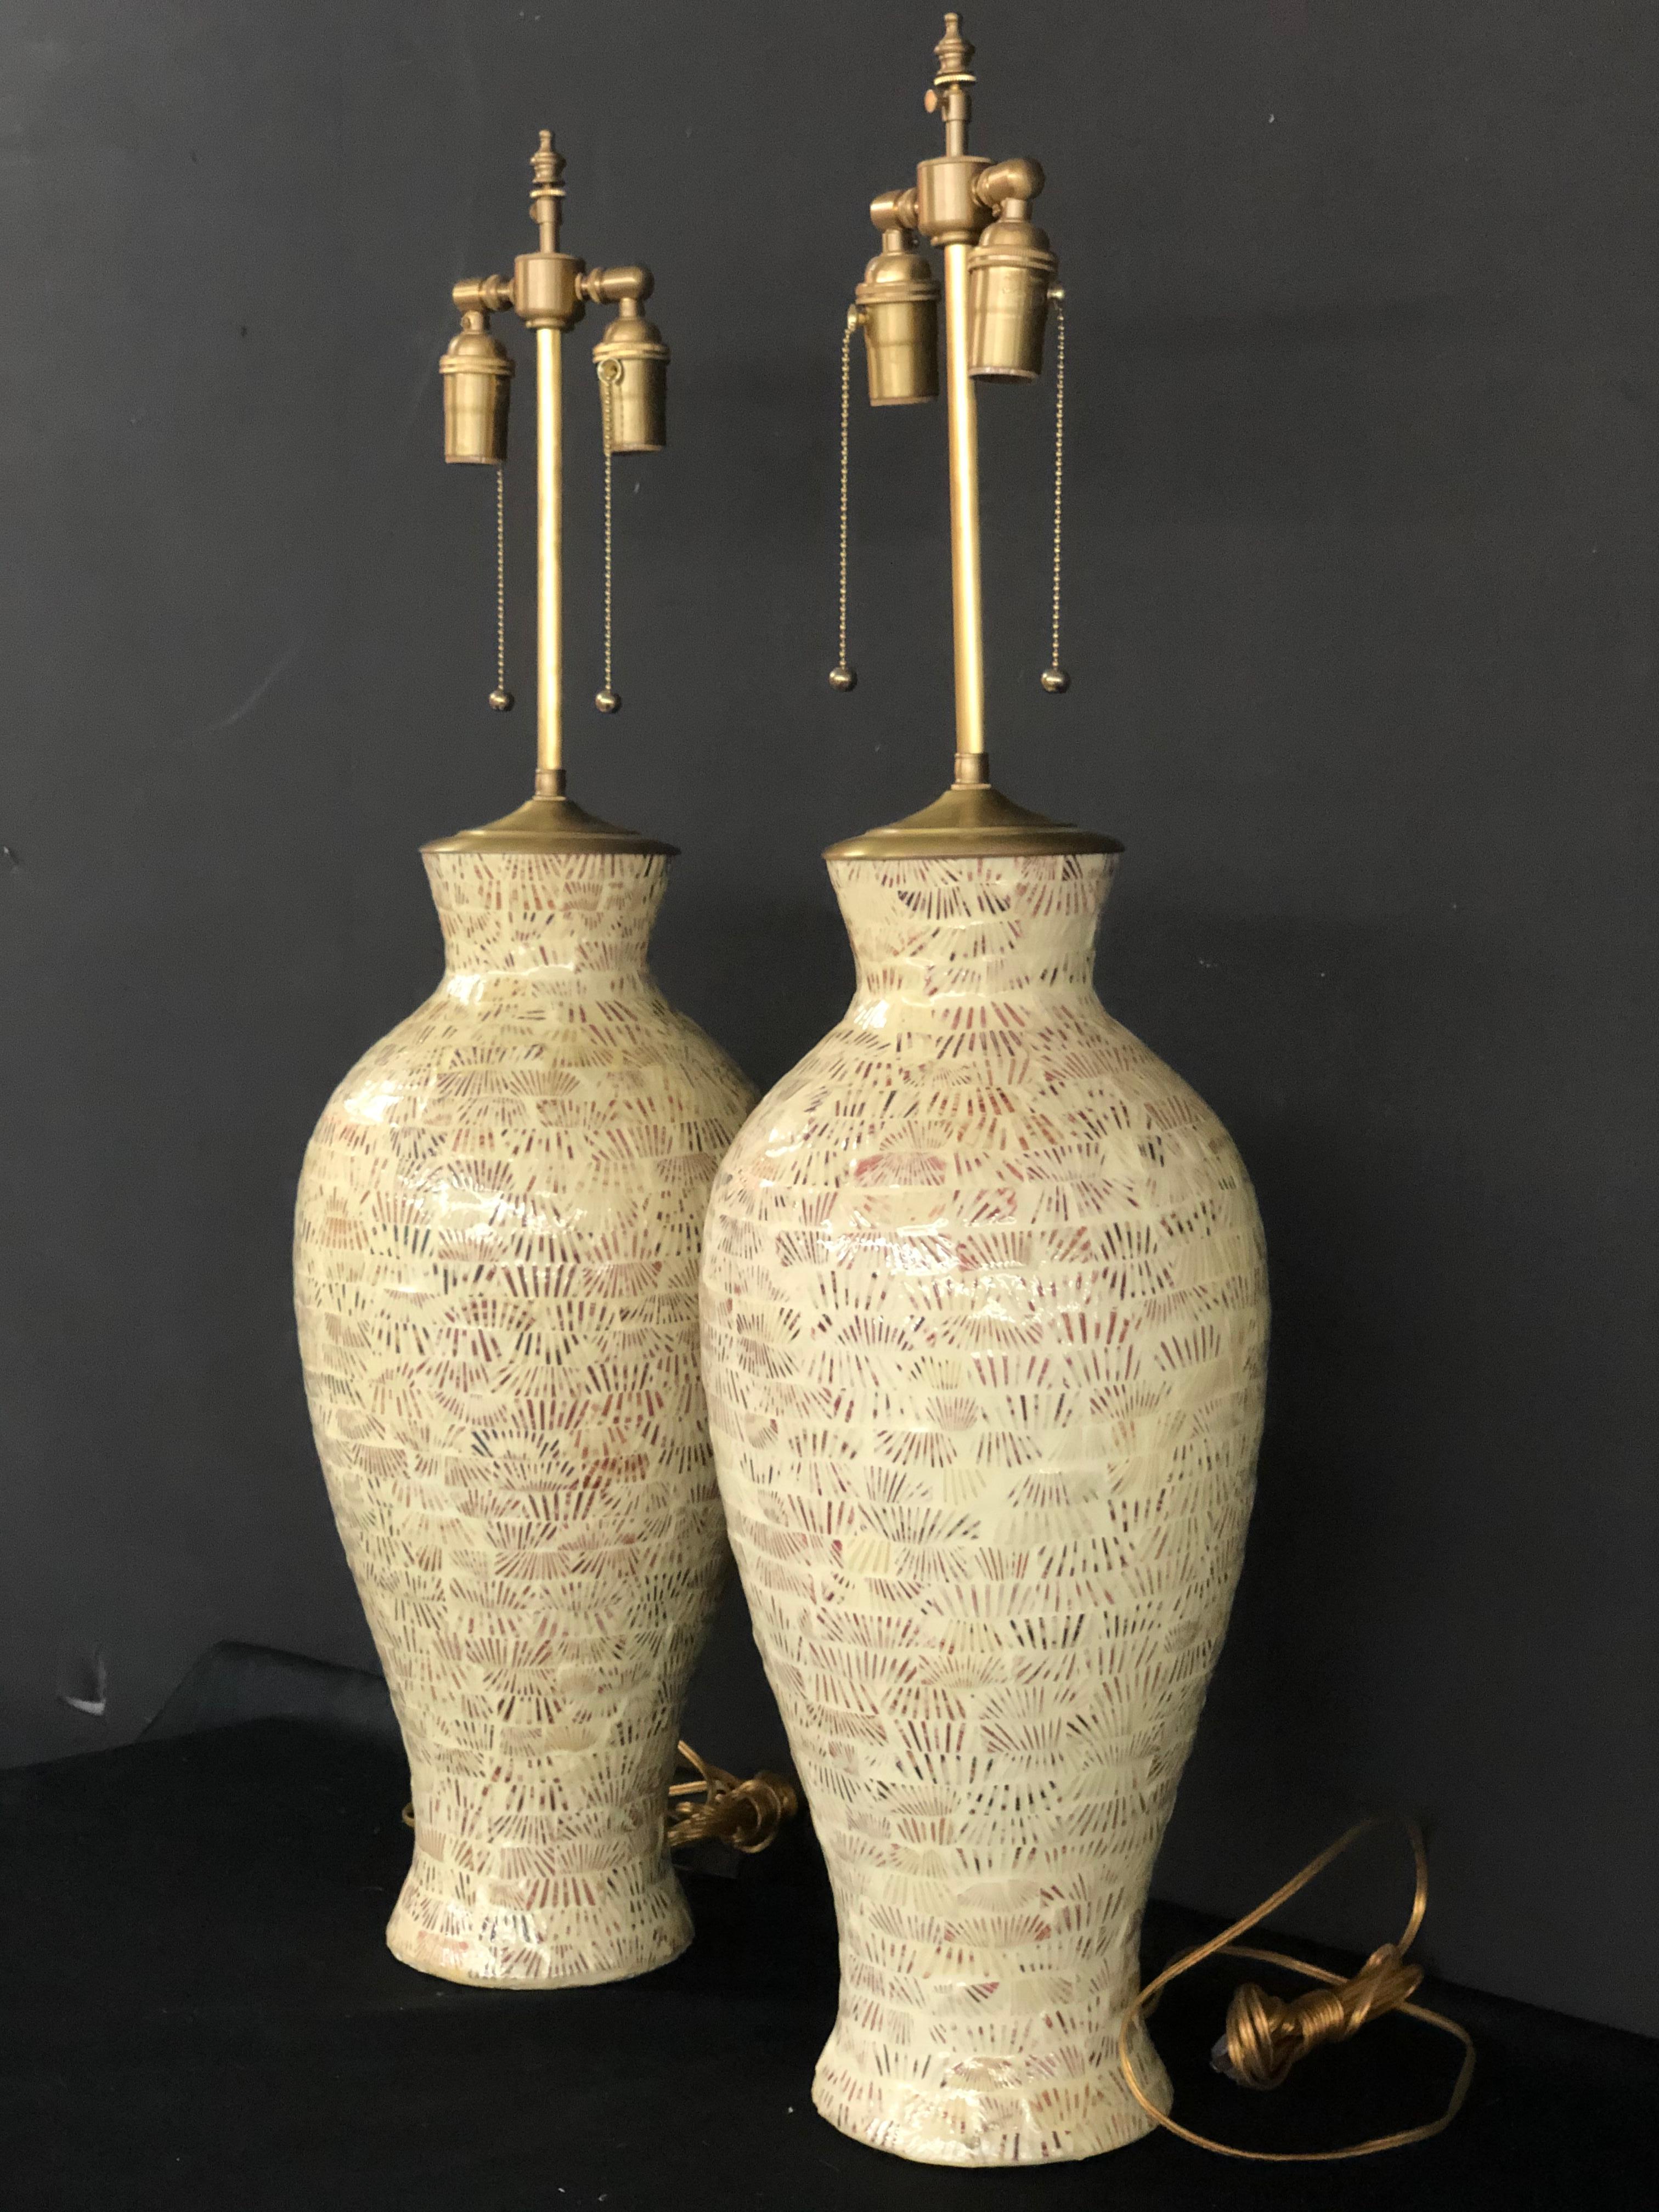 Large Pair of Ceramic Vessels with 